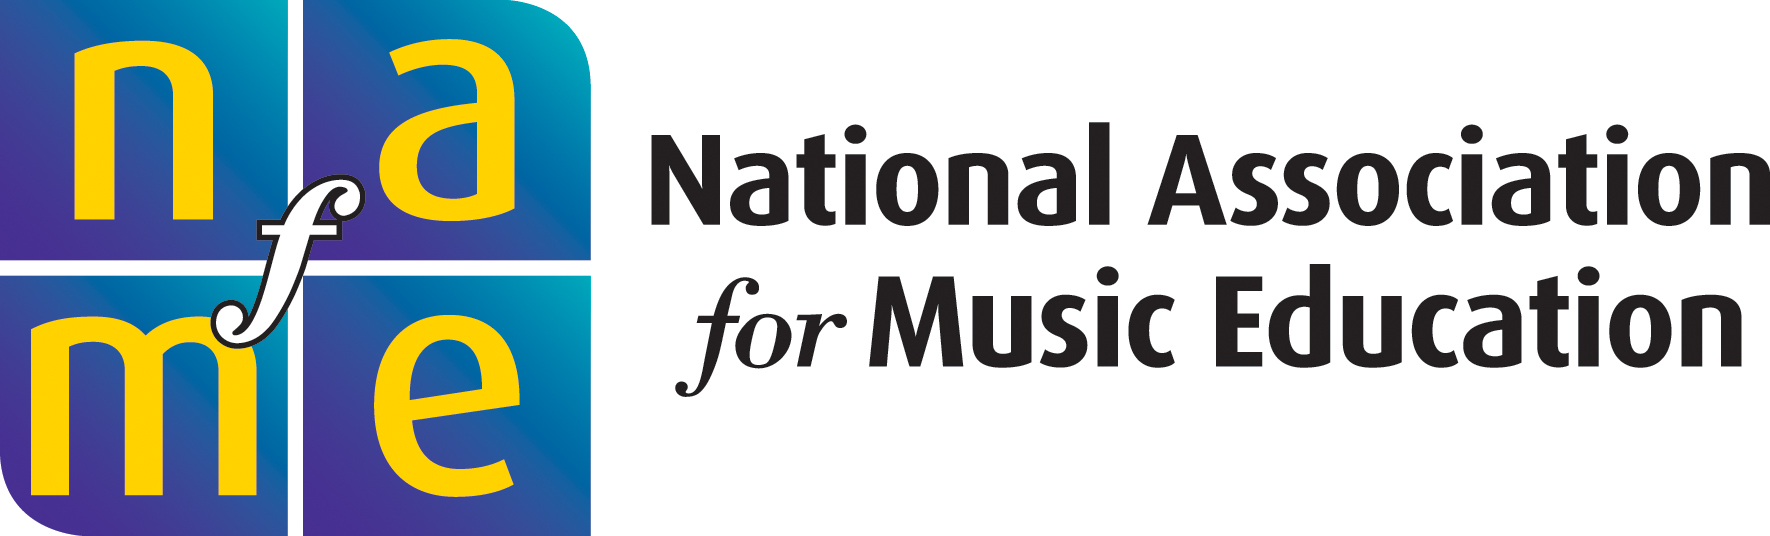 logo of the National Association for Music Education